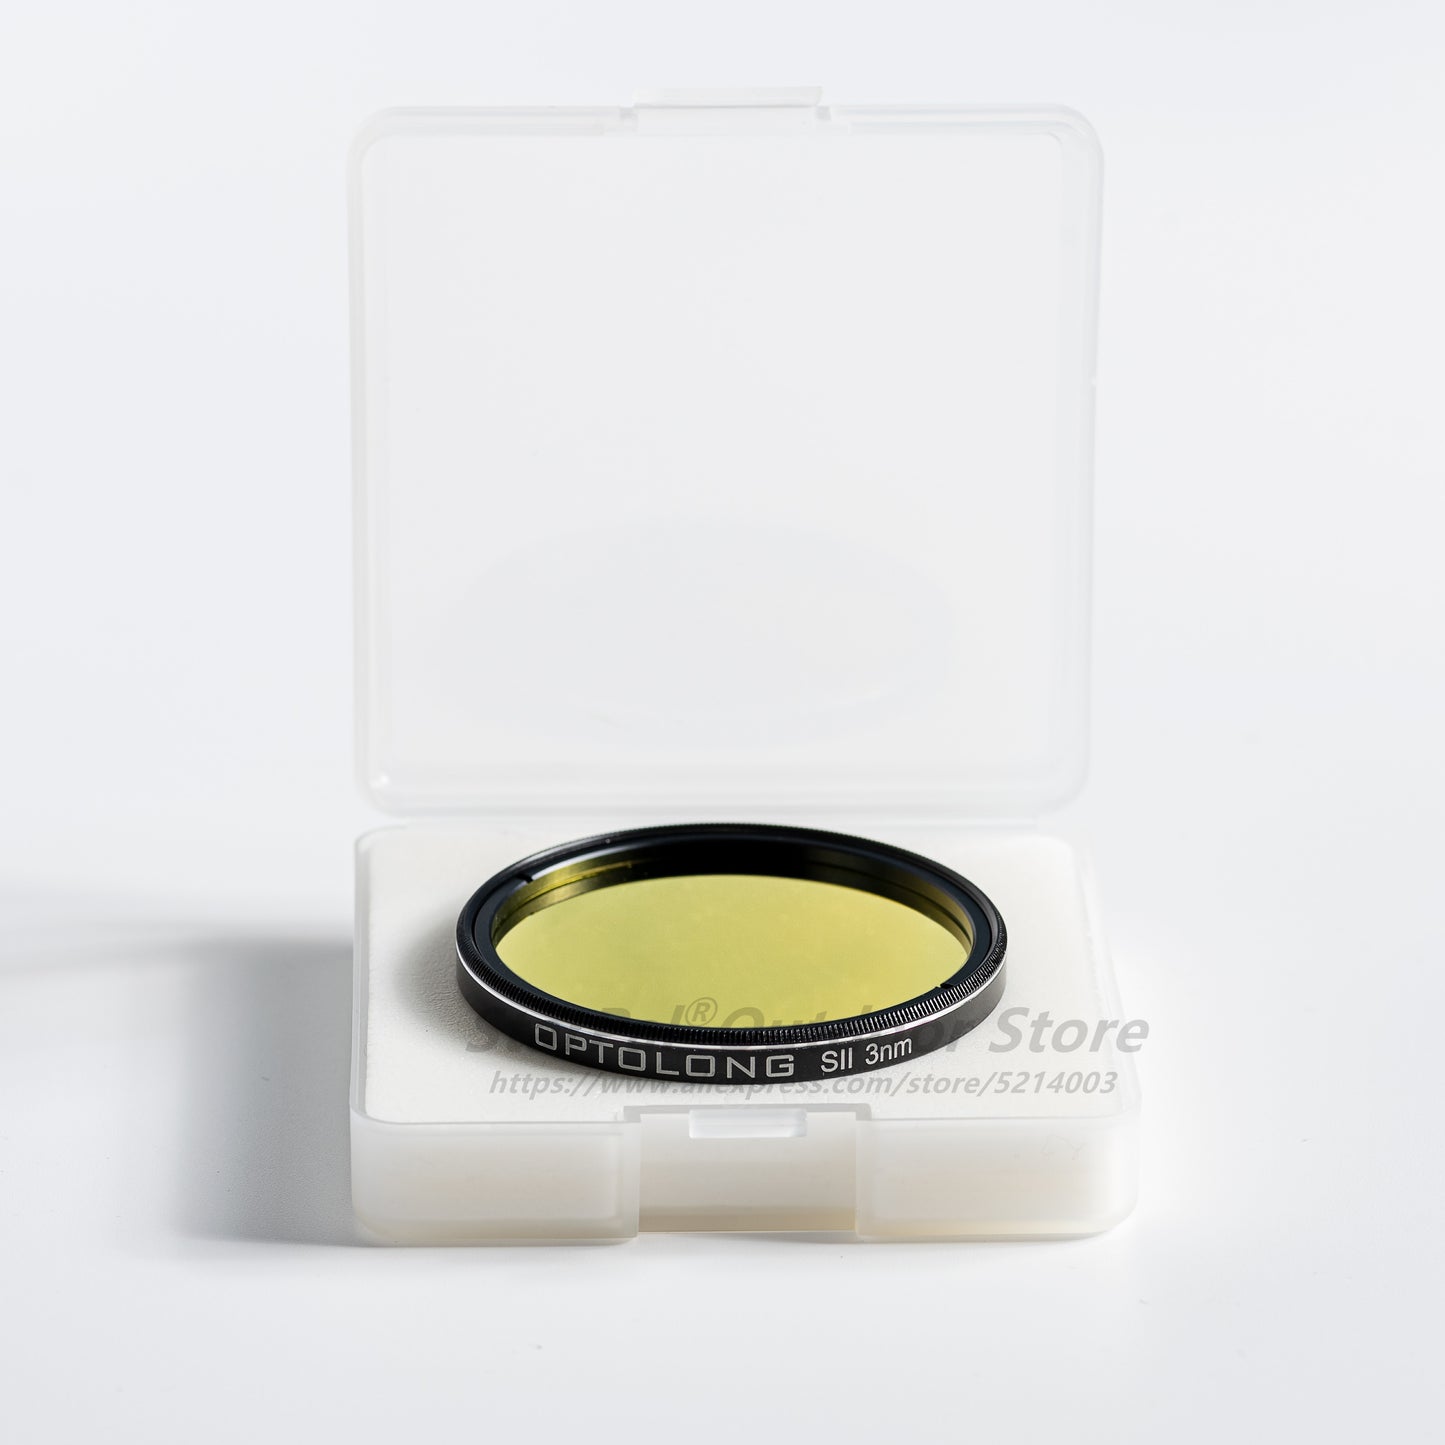 Optolong SHO-3nm Narrowband Filters Kit SII3nm, H-Alpha3nm, OIII3nm 2inch